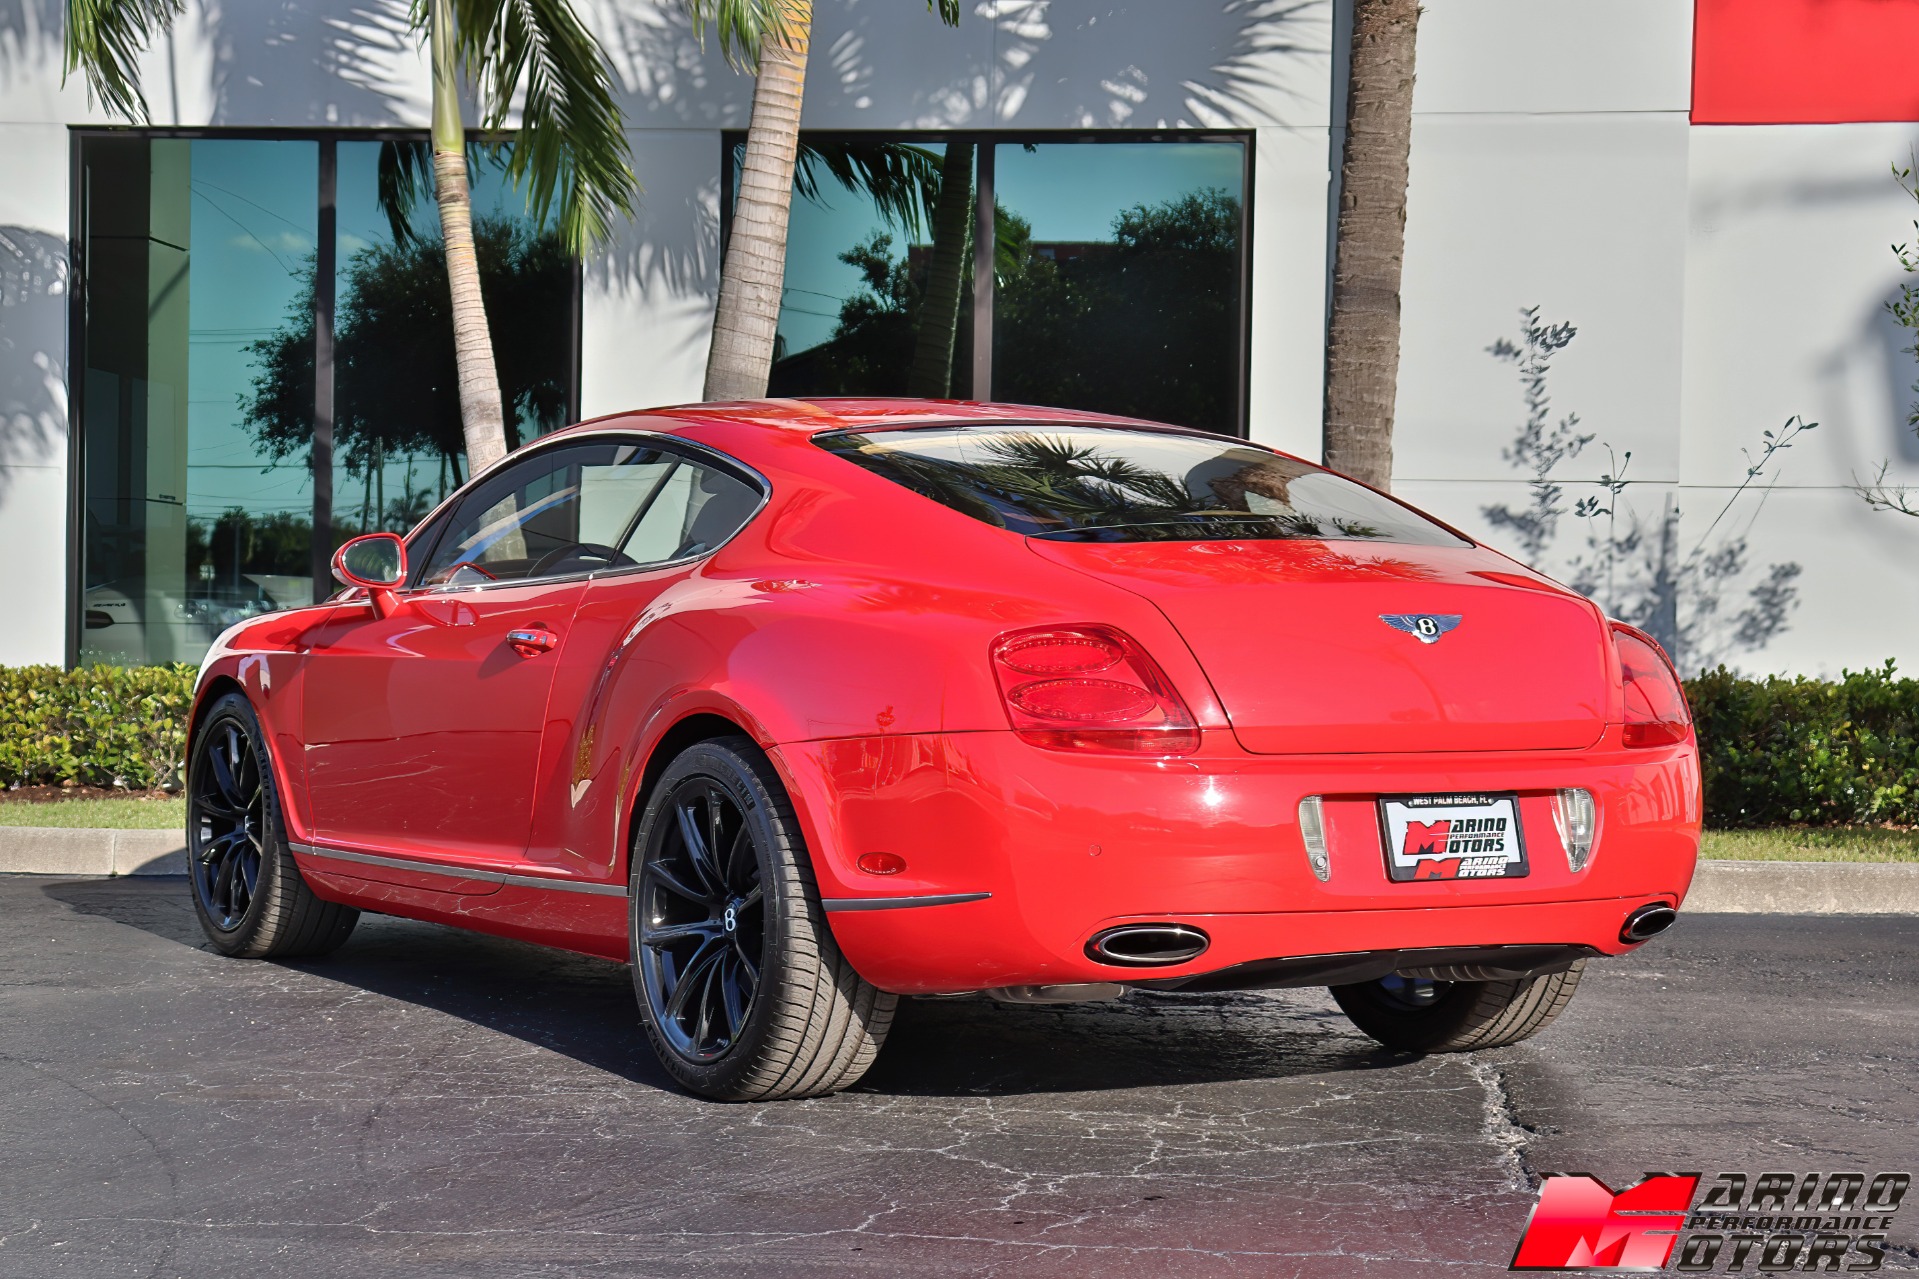 Used-2006-Bentley-Continental-GT